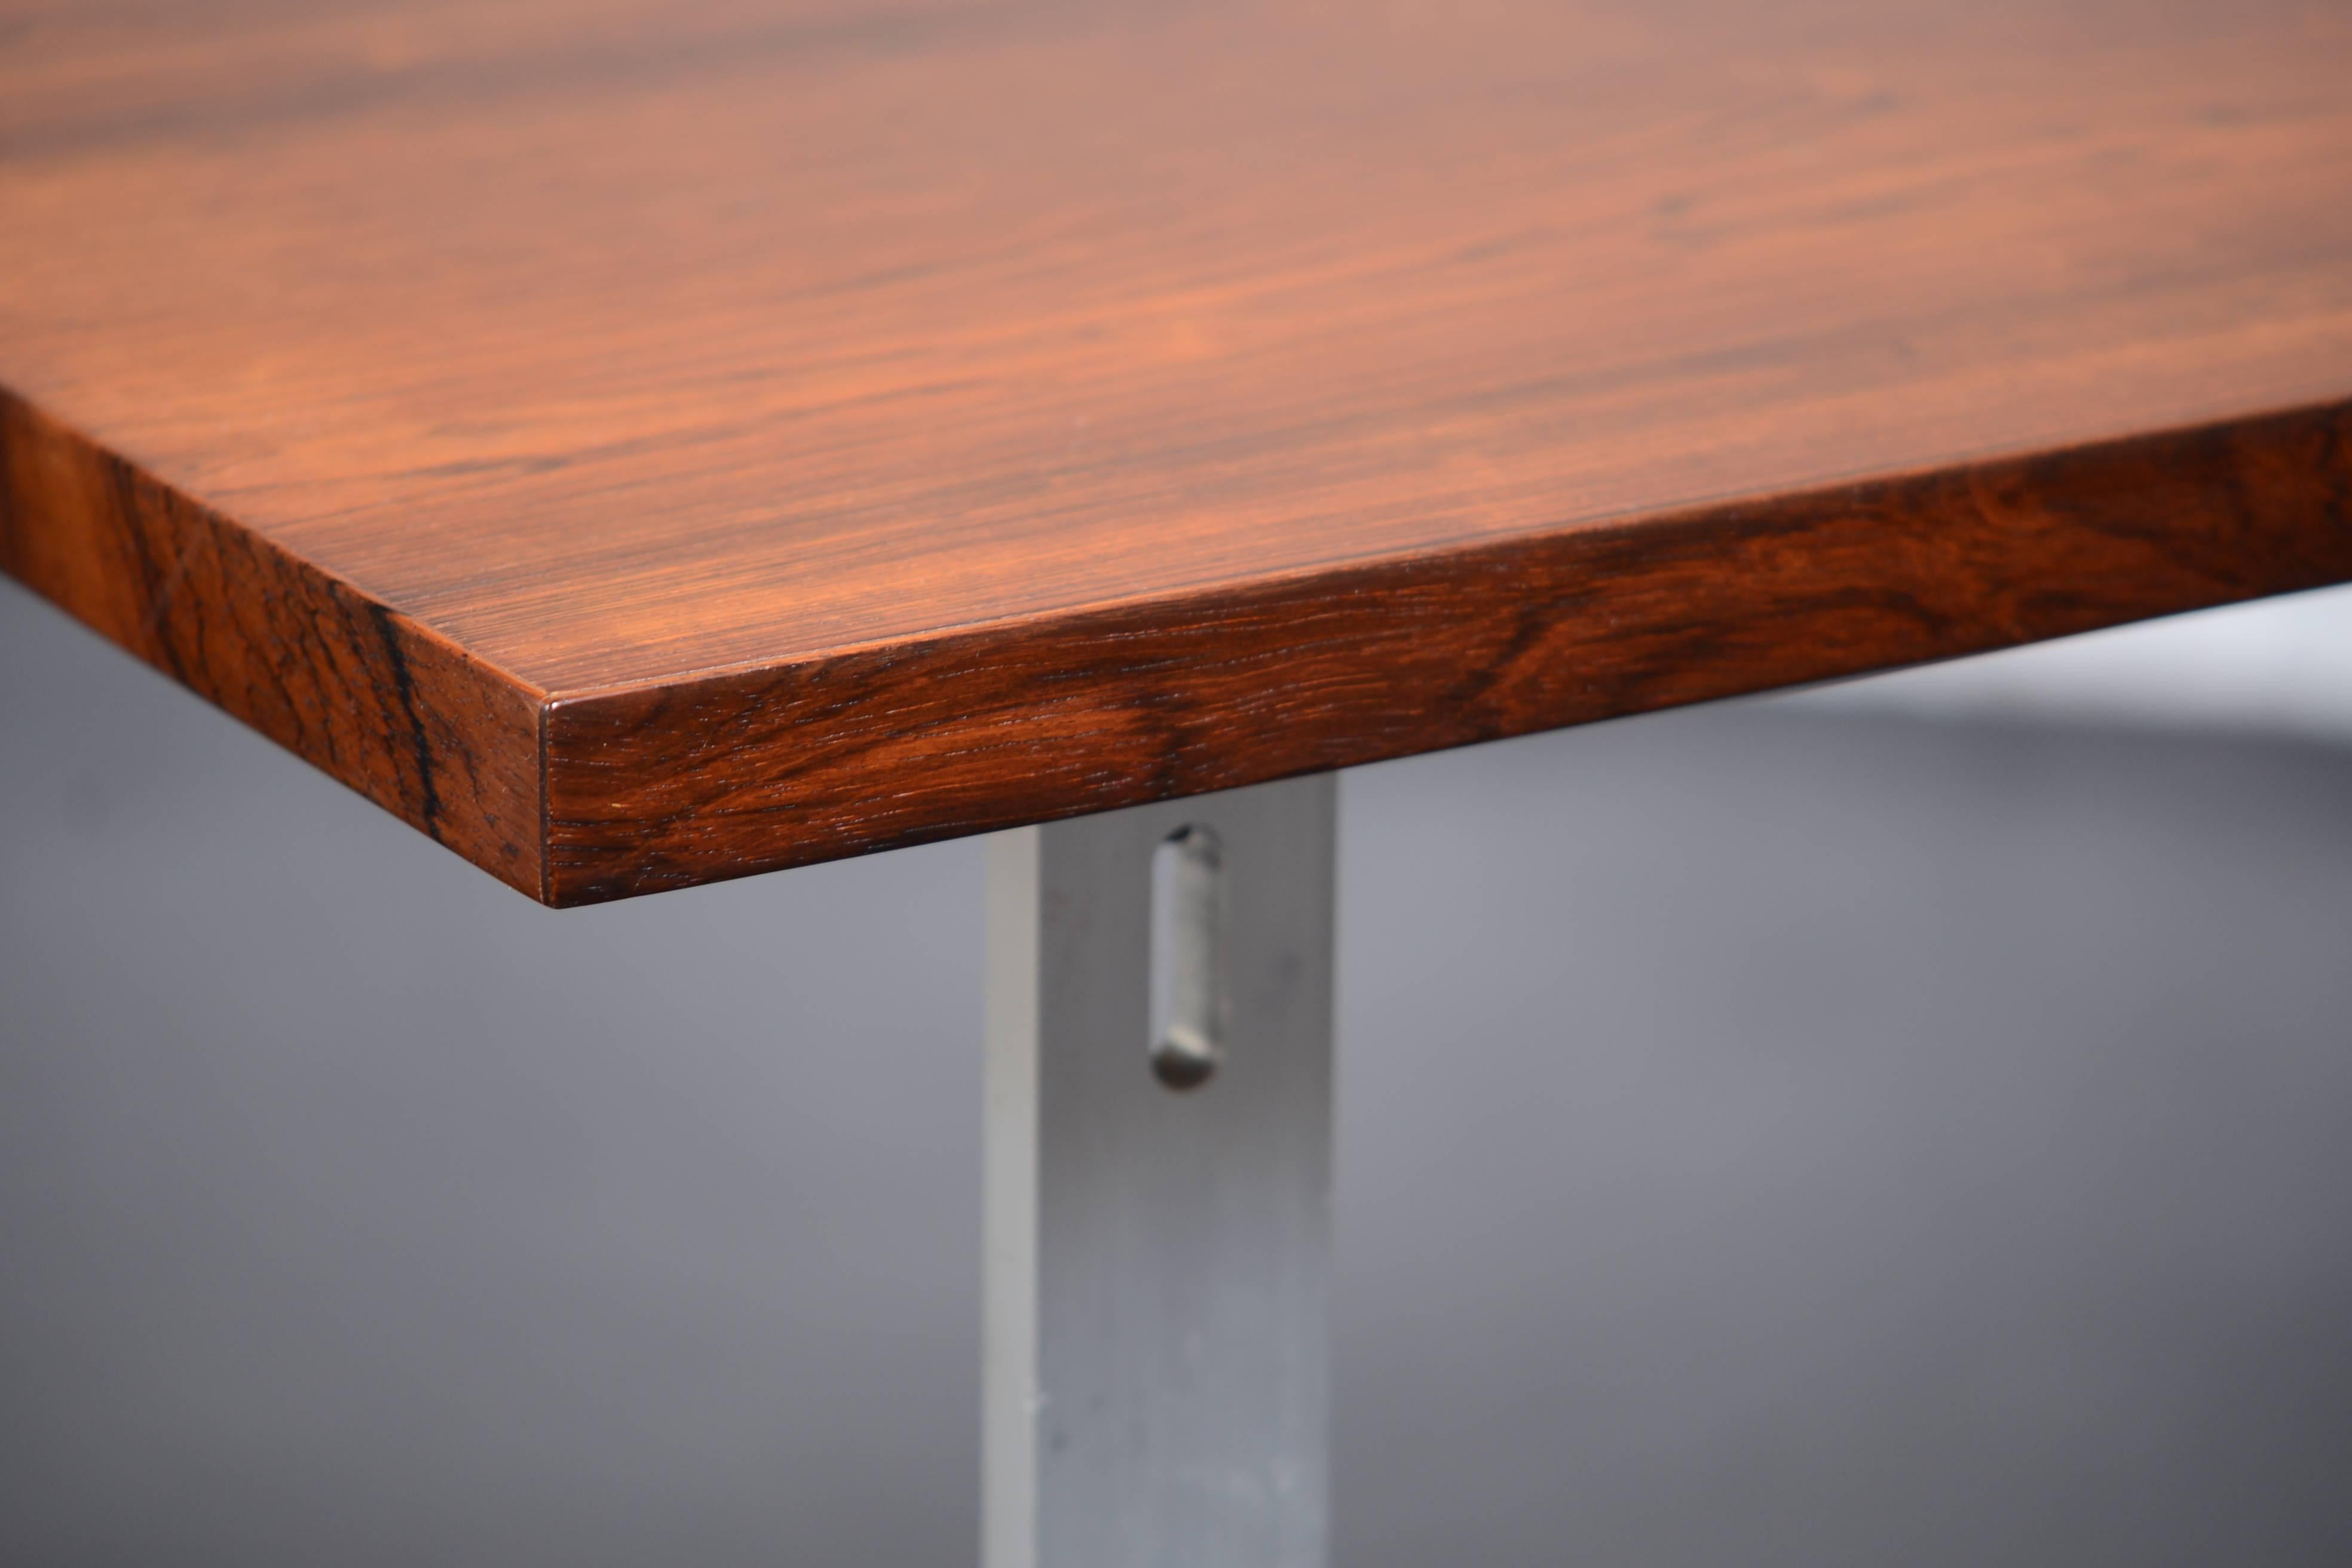 Mid-20th Century Jørgen Hoj Danish Rosewood Desk or Dining Table Made in 1962 by Niels Vitsoe For Sale